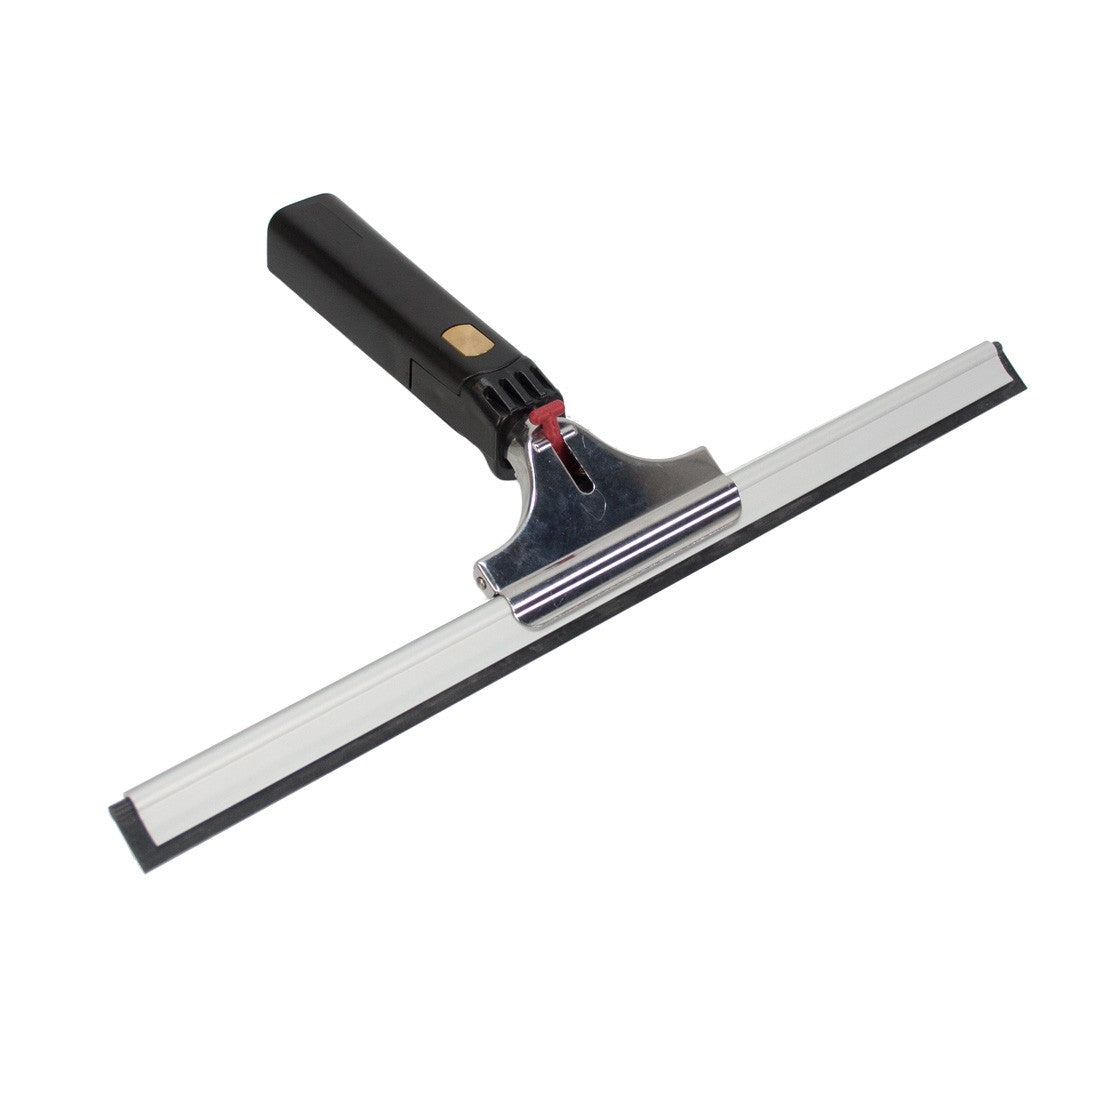 Pulex Complete Swivel Stutzy Squeegee Top View